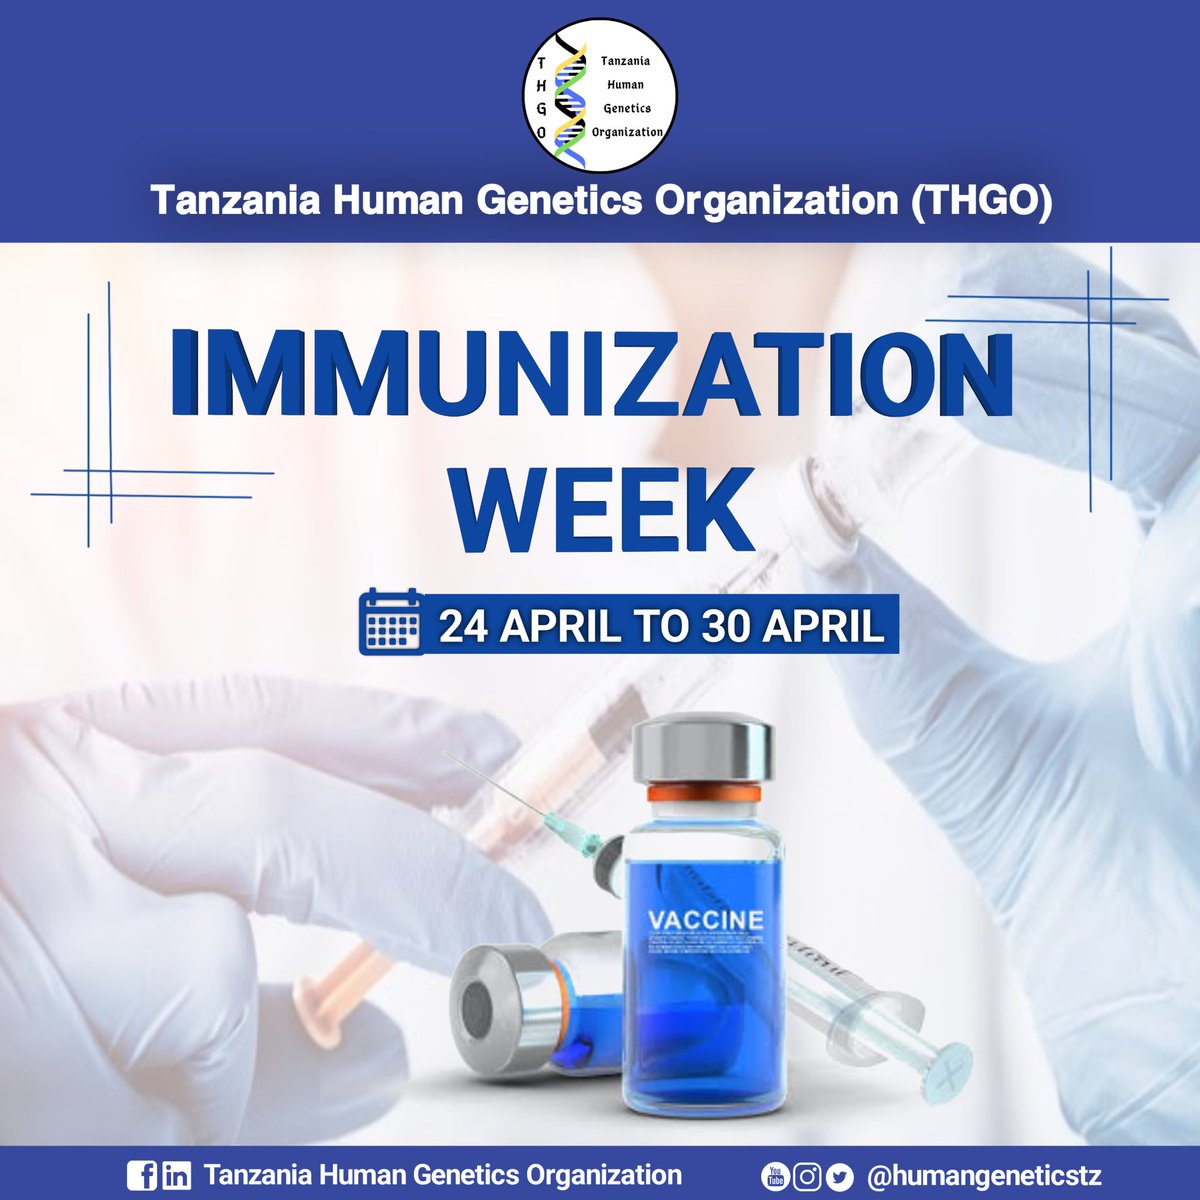 In marking the Immunization week, THGO unites with Immunization advocates in the country and around the world in sharing knowledge, raising awareness and urging parents and guardians to have their children vaccinated.

#VaccinesWork
#ImmunizationWorldWeek